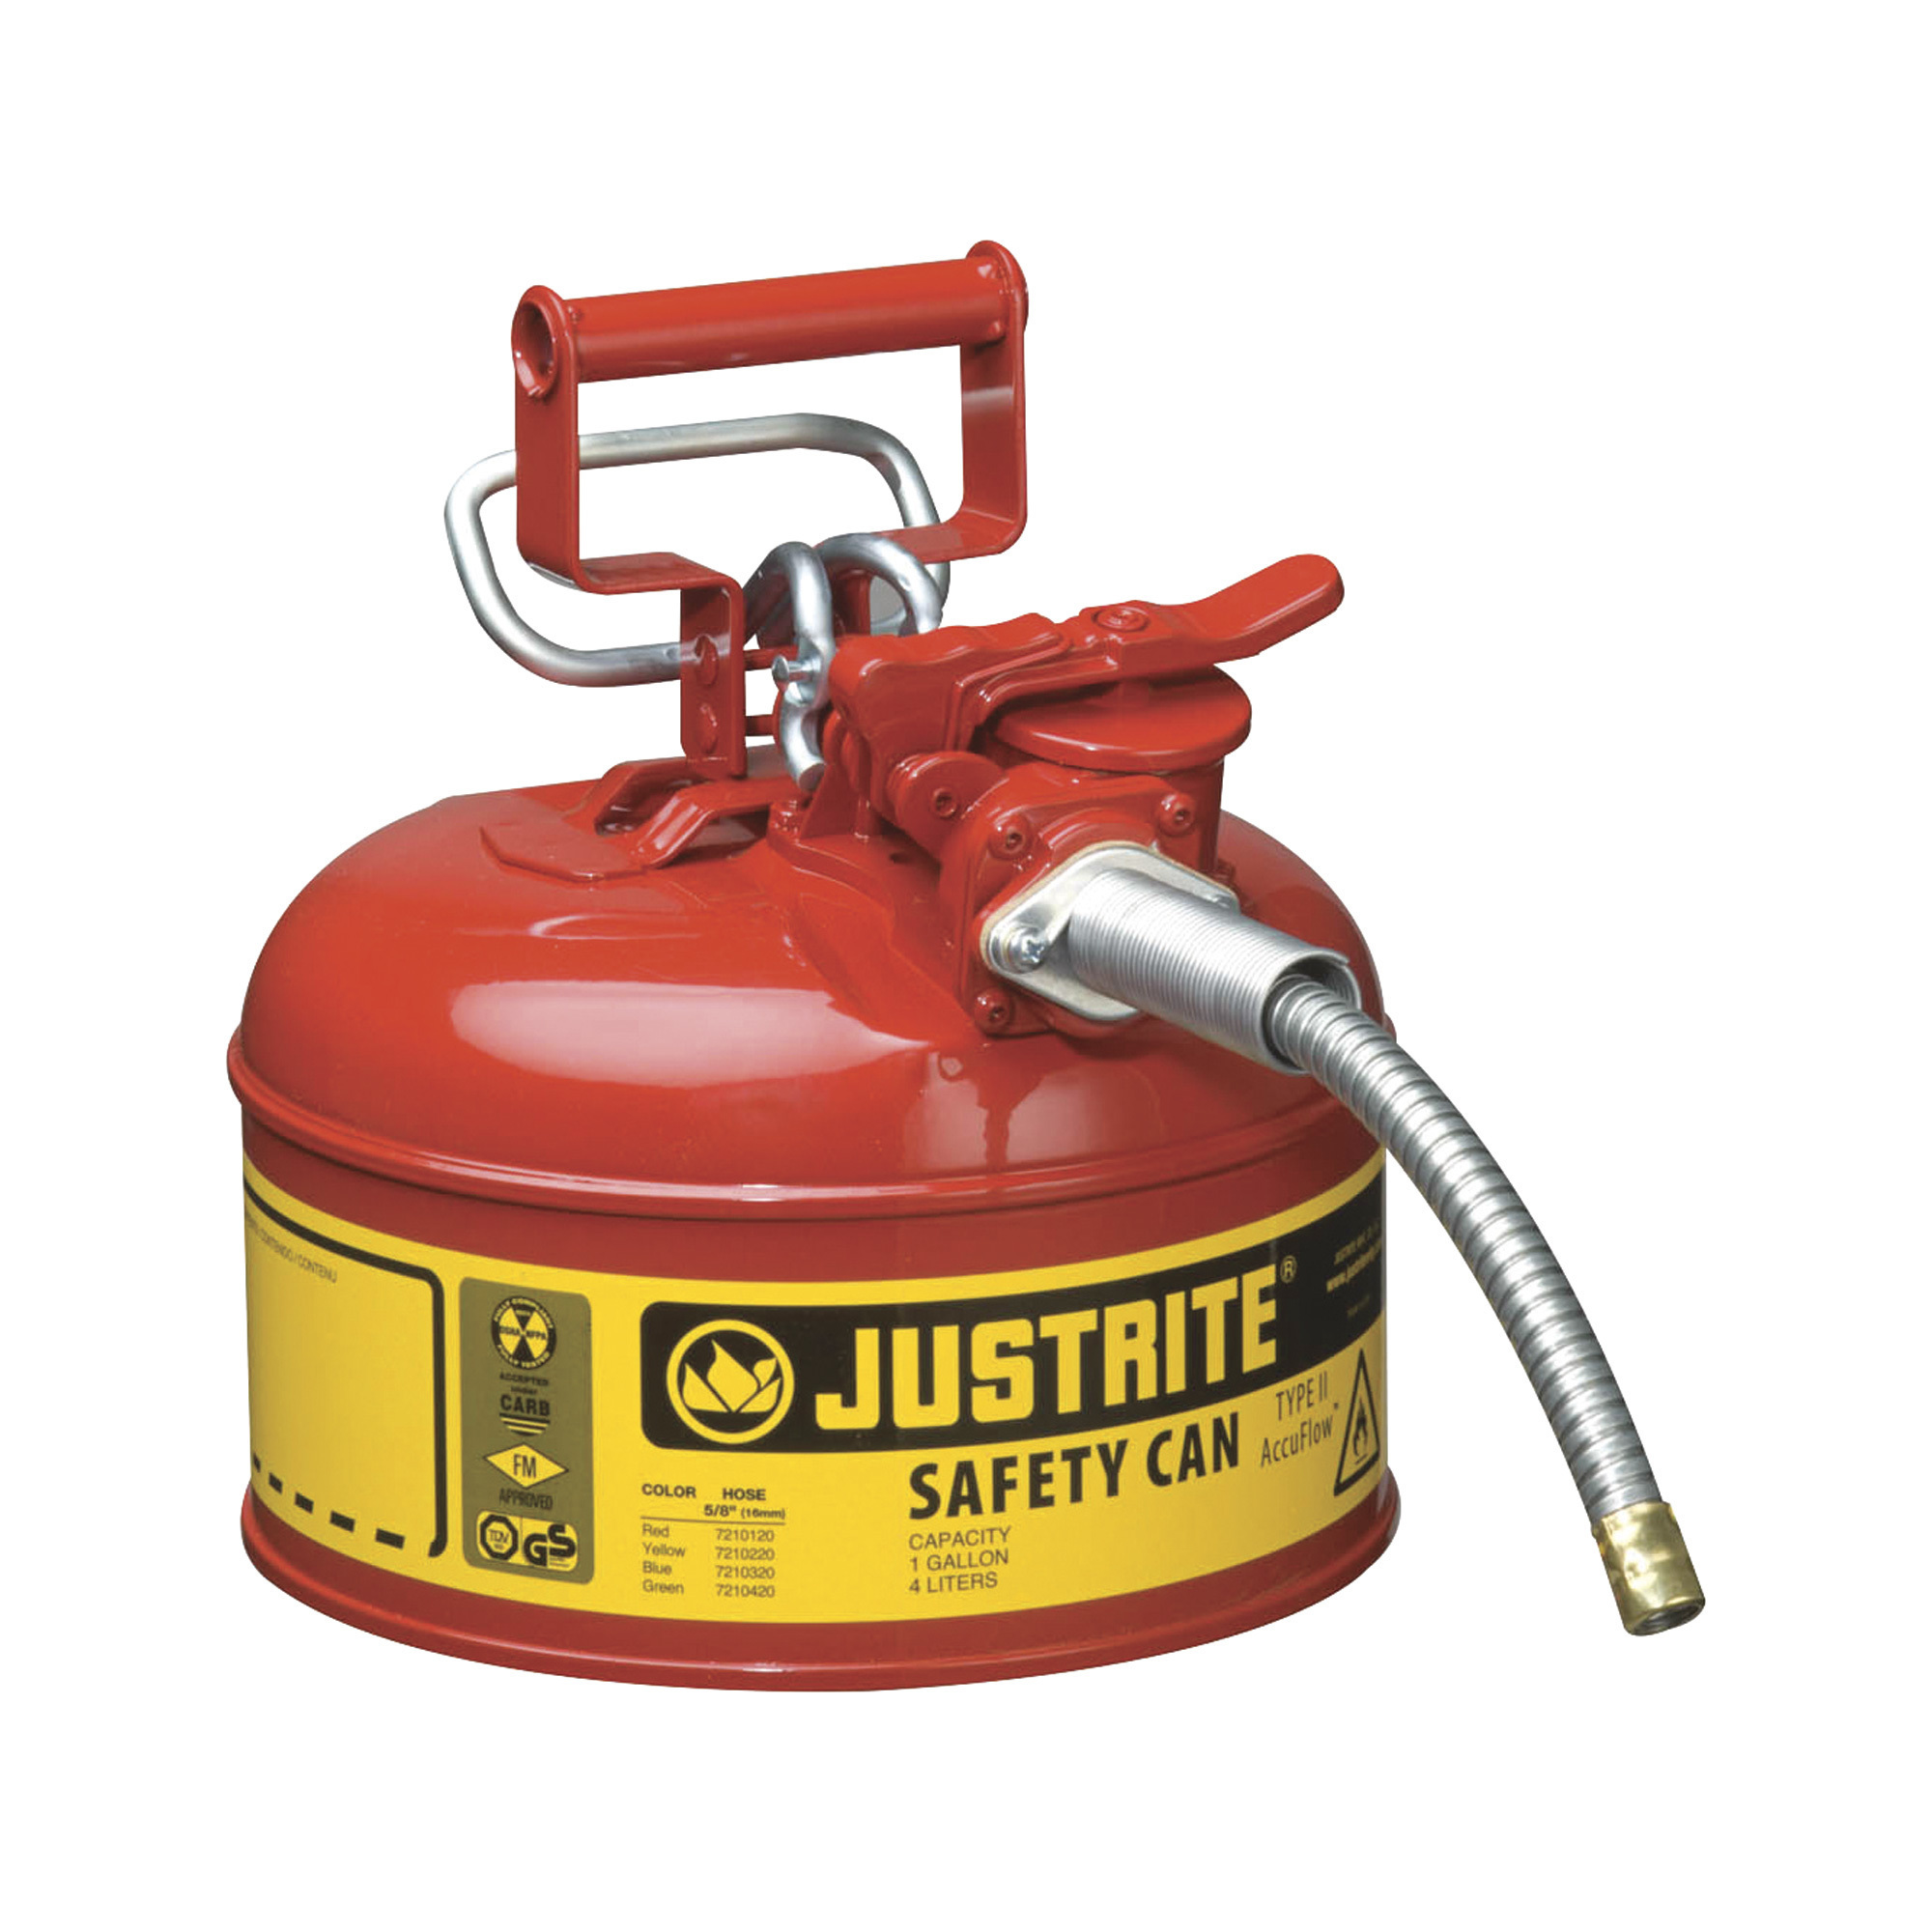 Justrite Safety Gas Can â 1-Gallon, Model 7210120